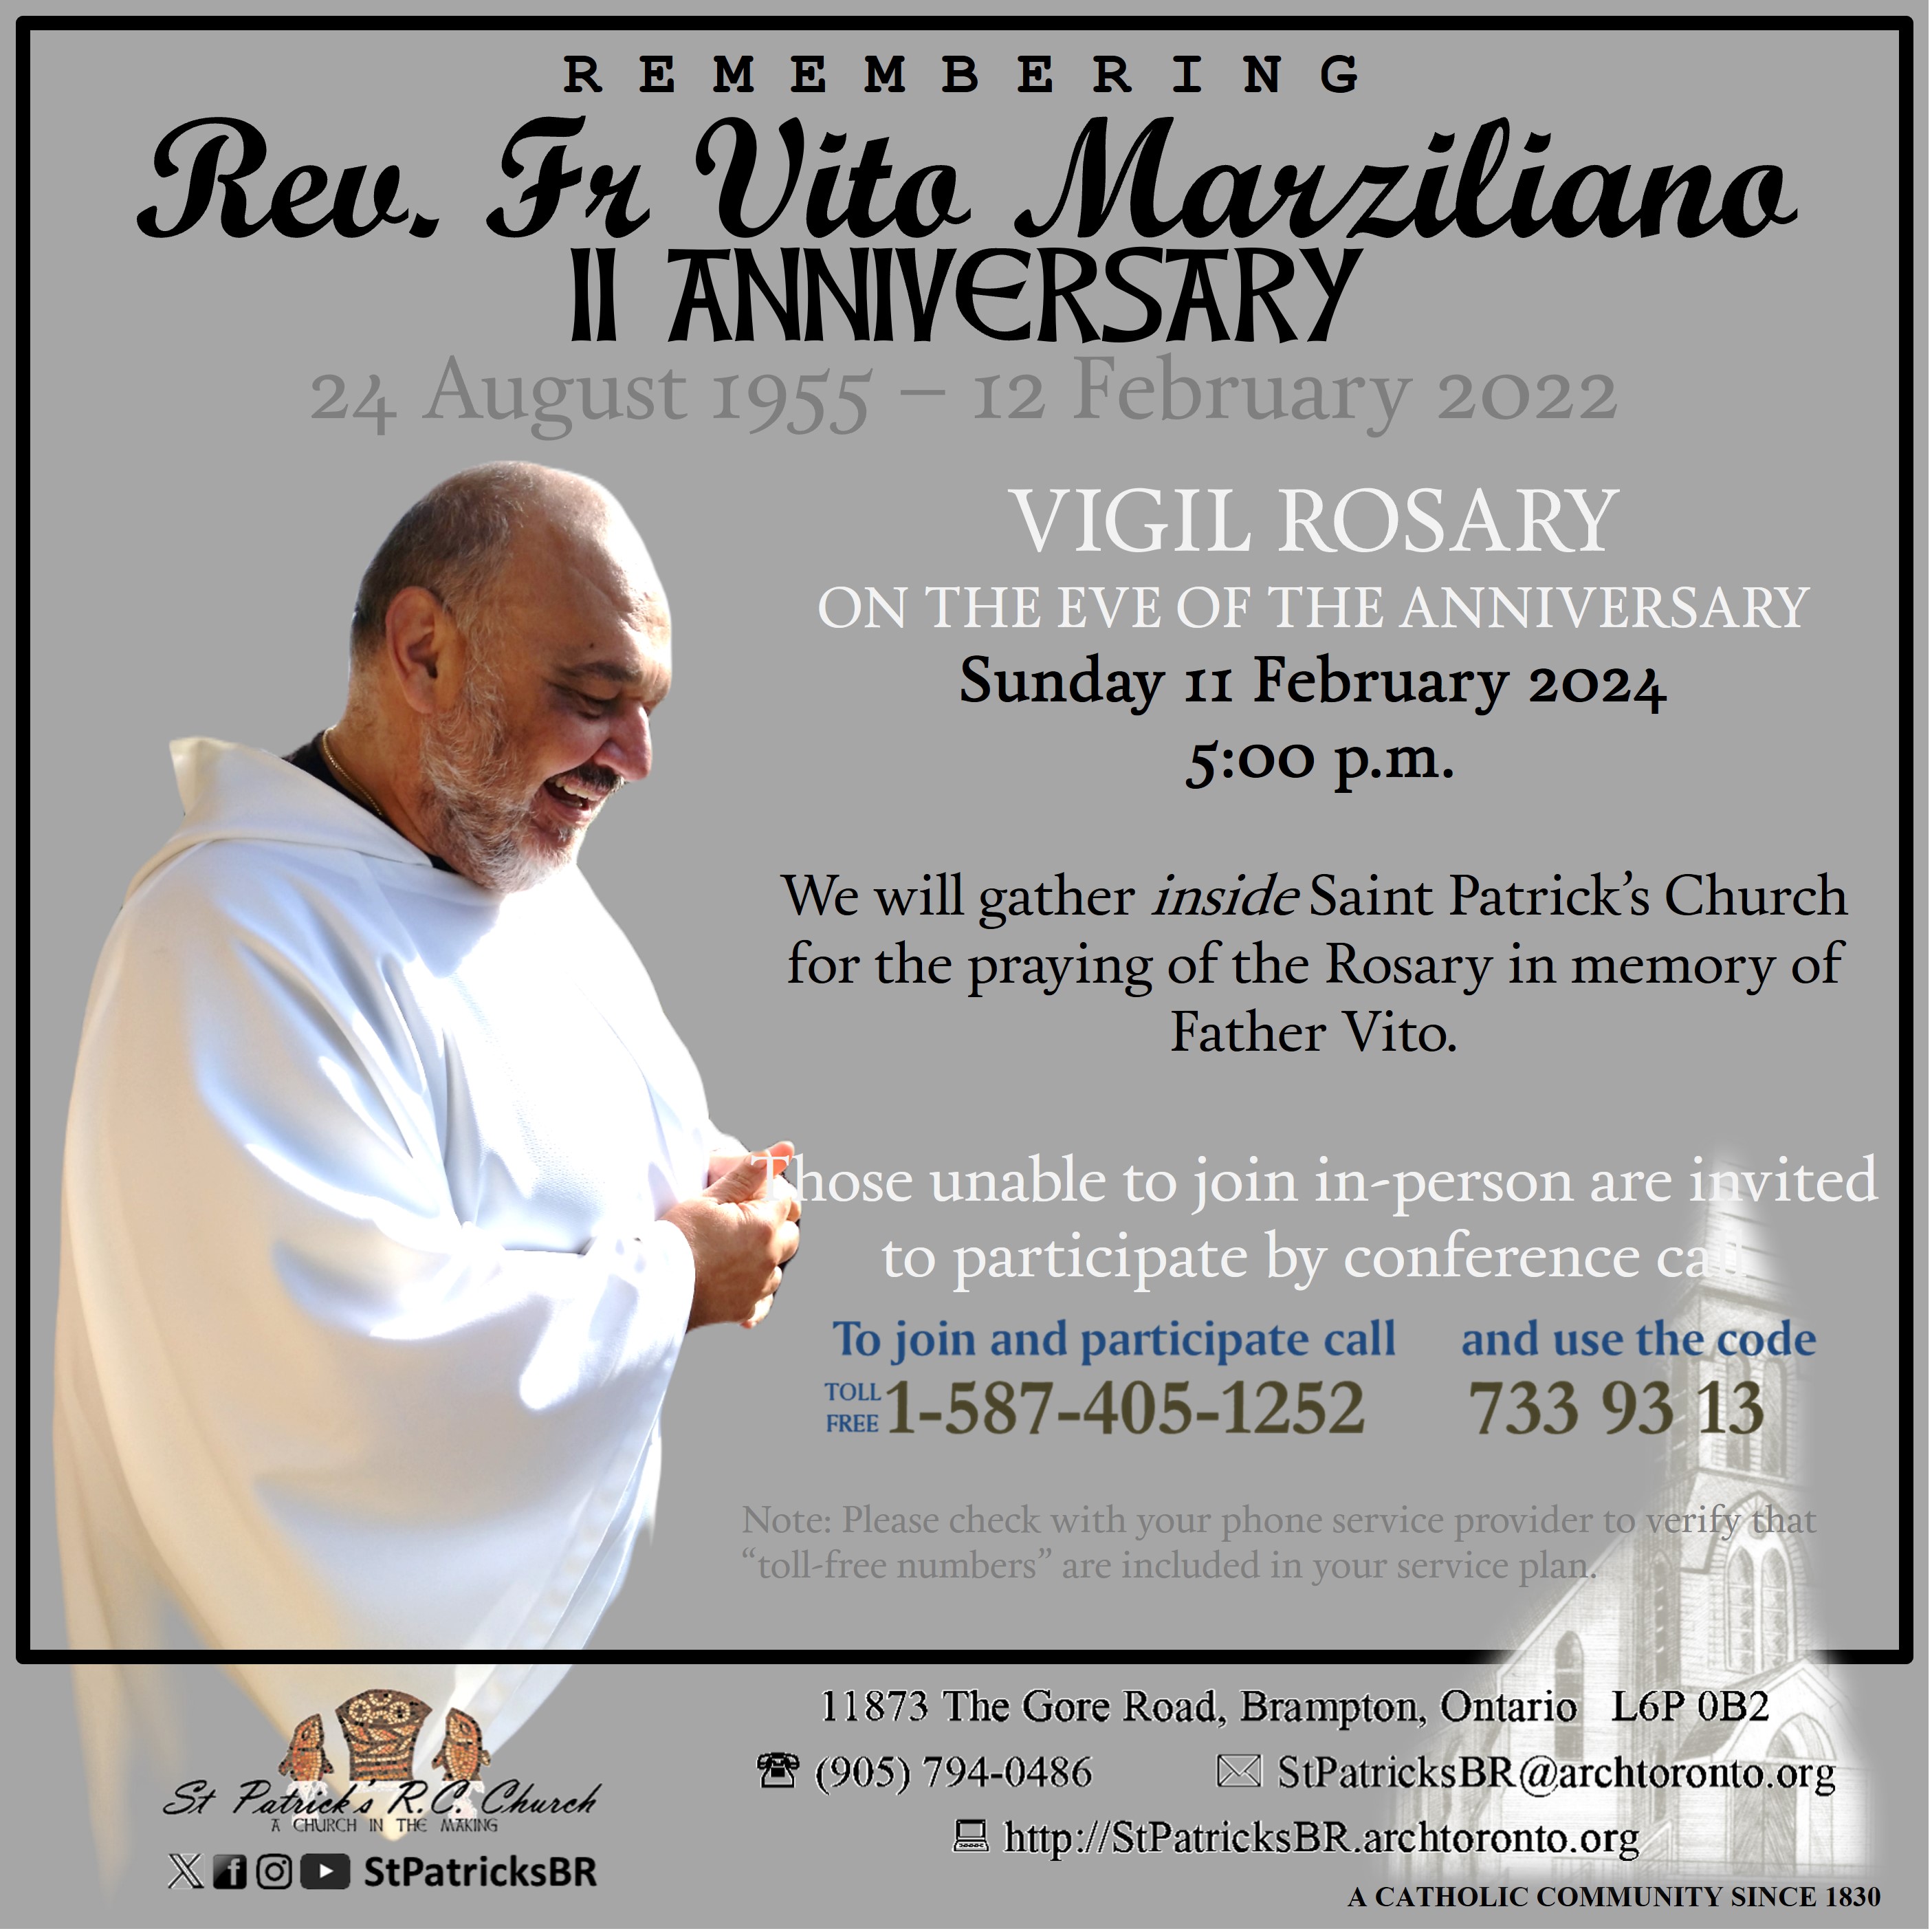 Vigil Rosary for the Eve of Father Vito's II Death Anniversary